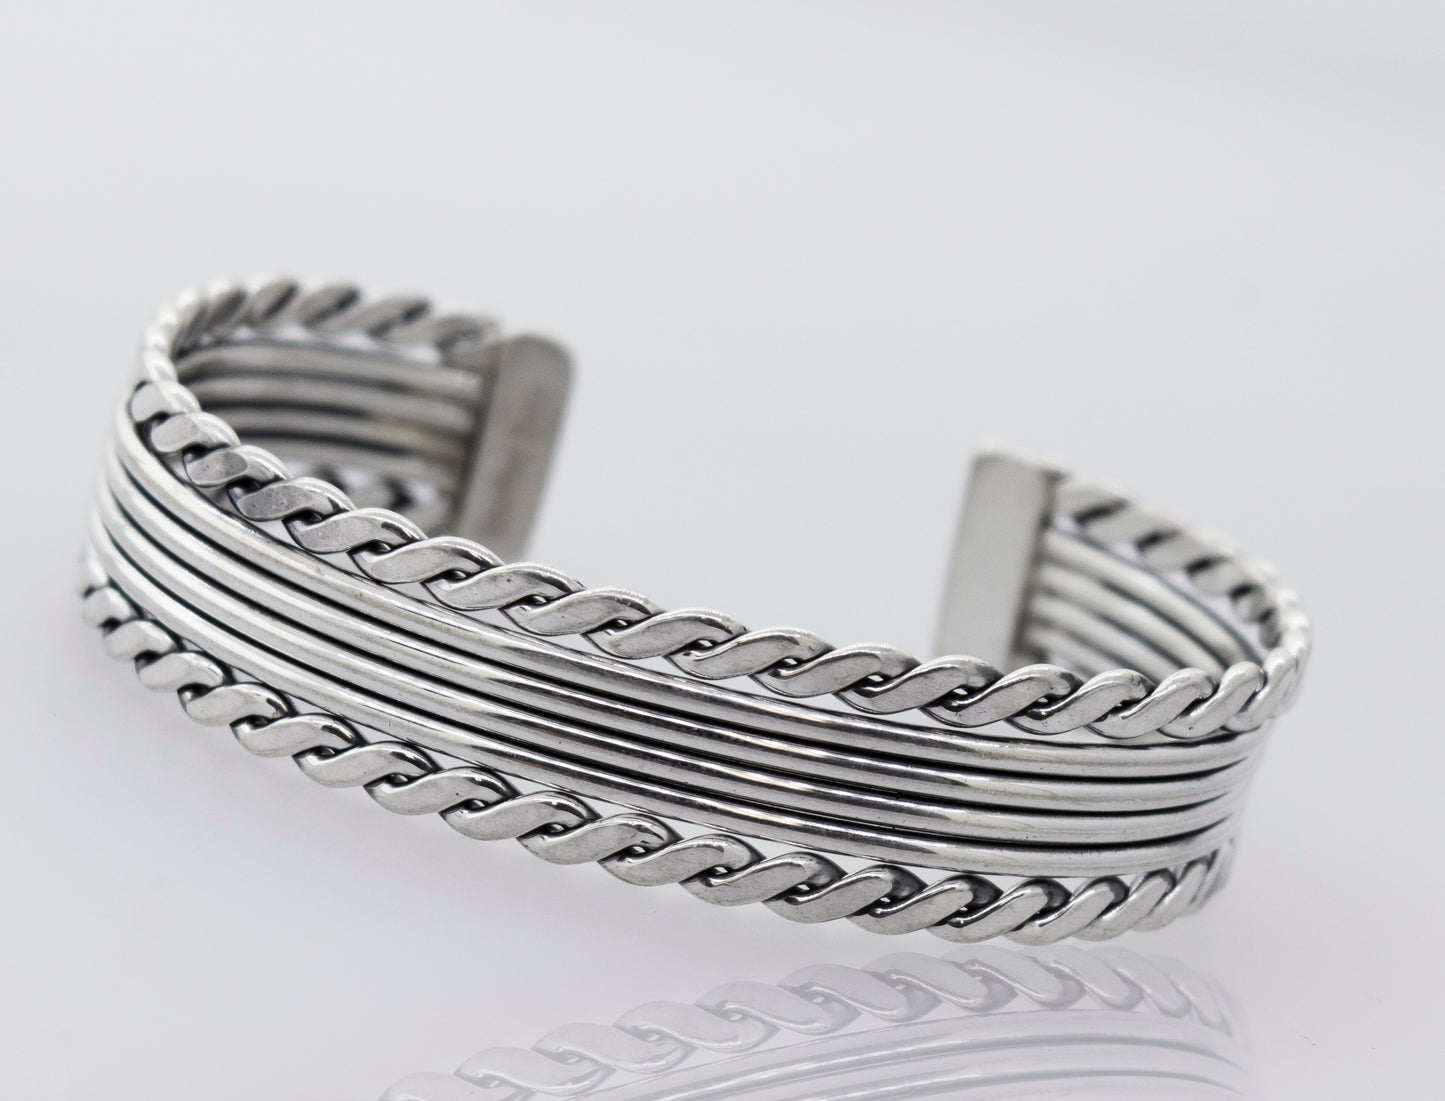 A Native American Handmade Thick Silver Cuff with a Rope Border by Super Silver, a statement piece.